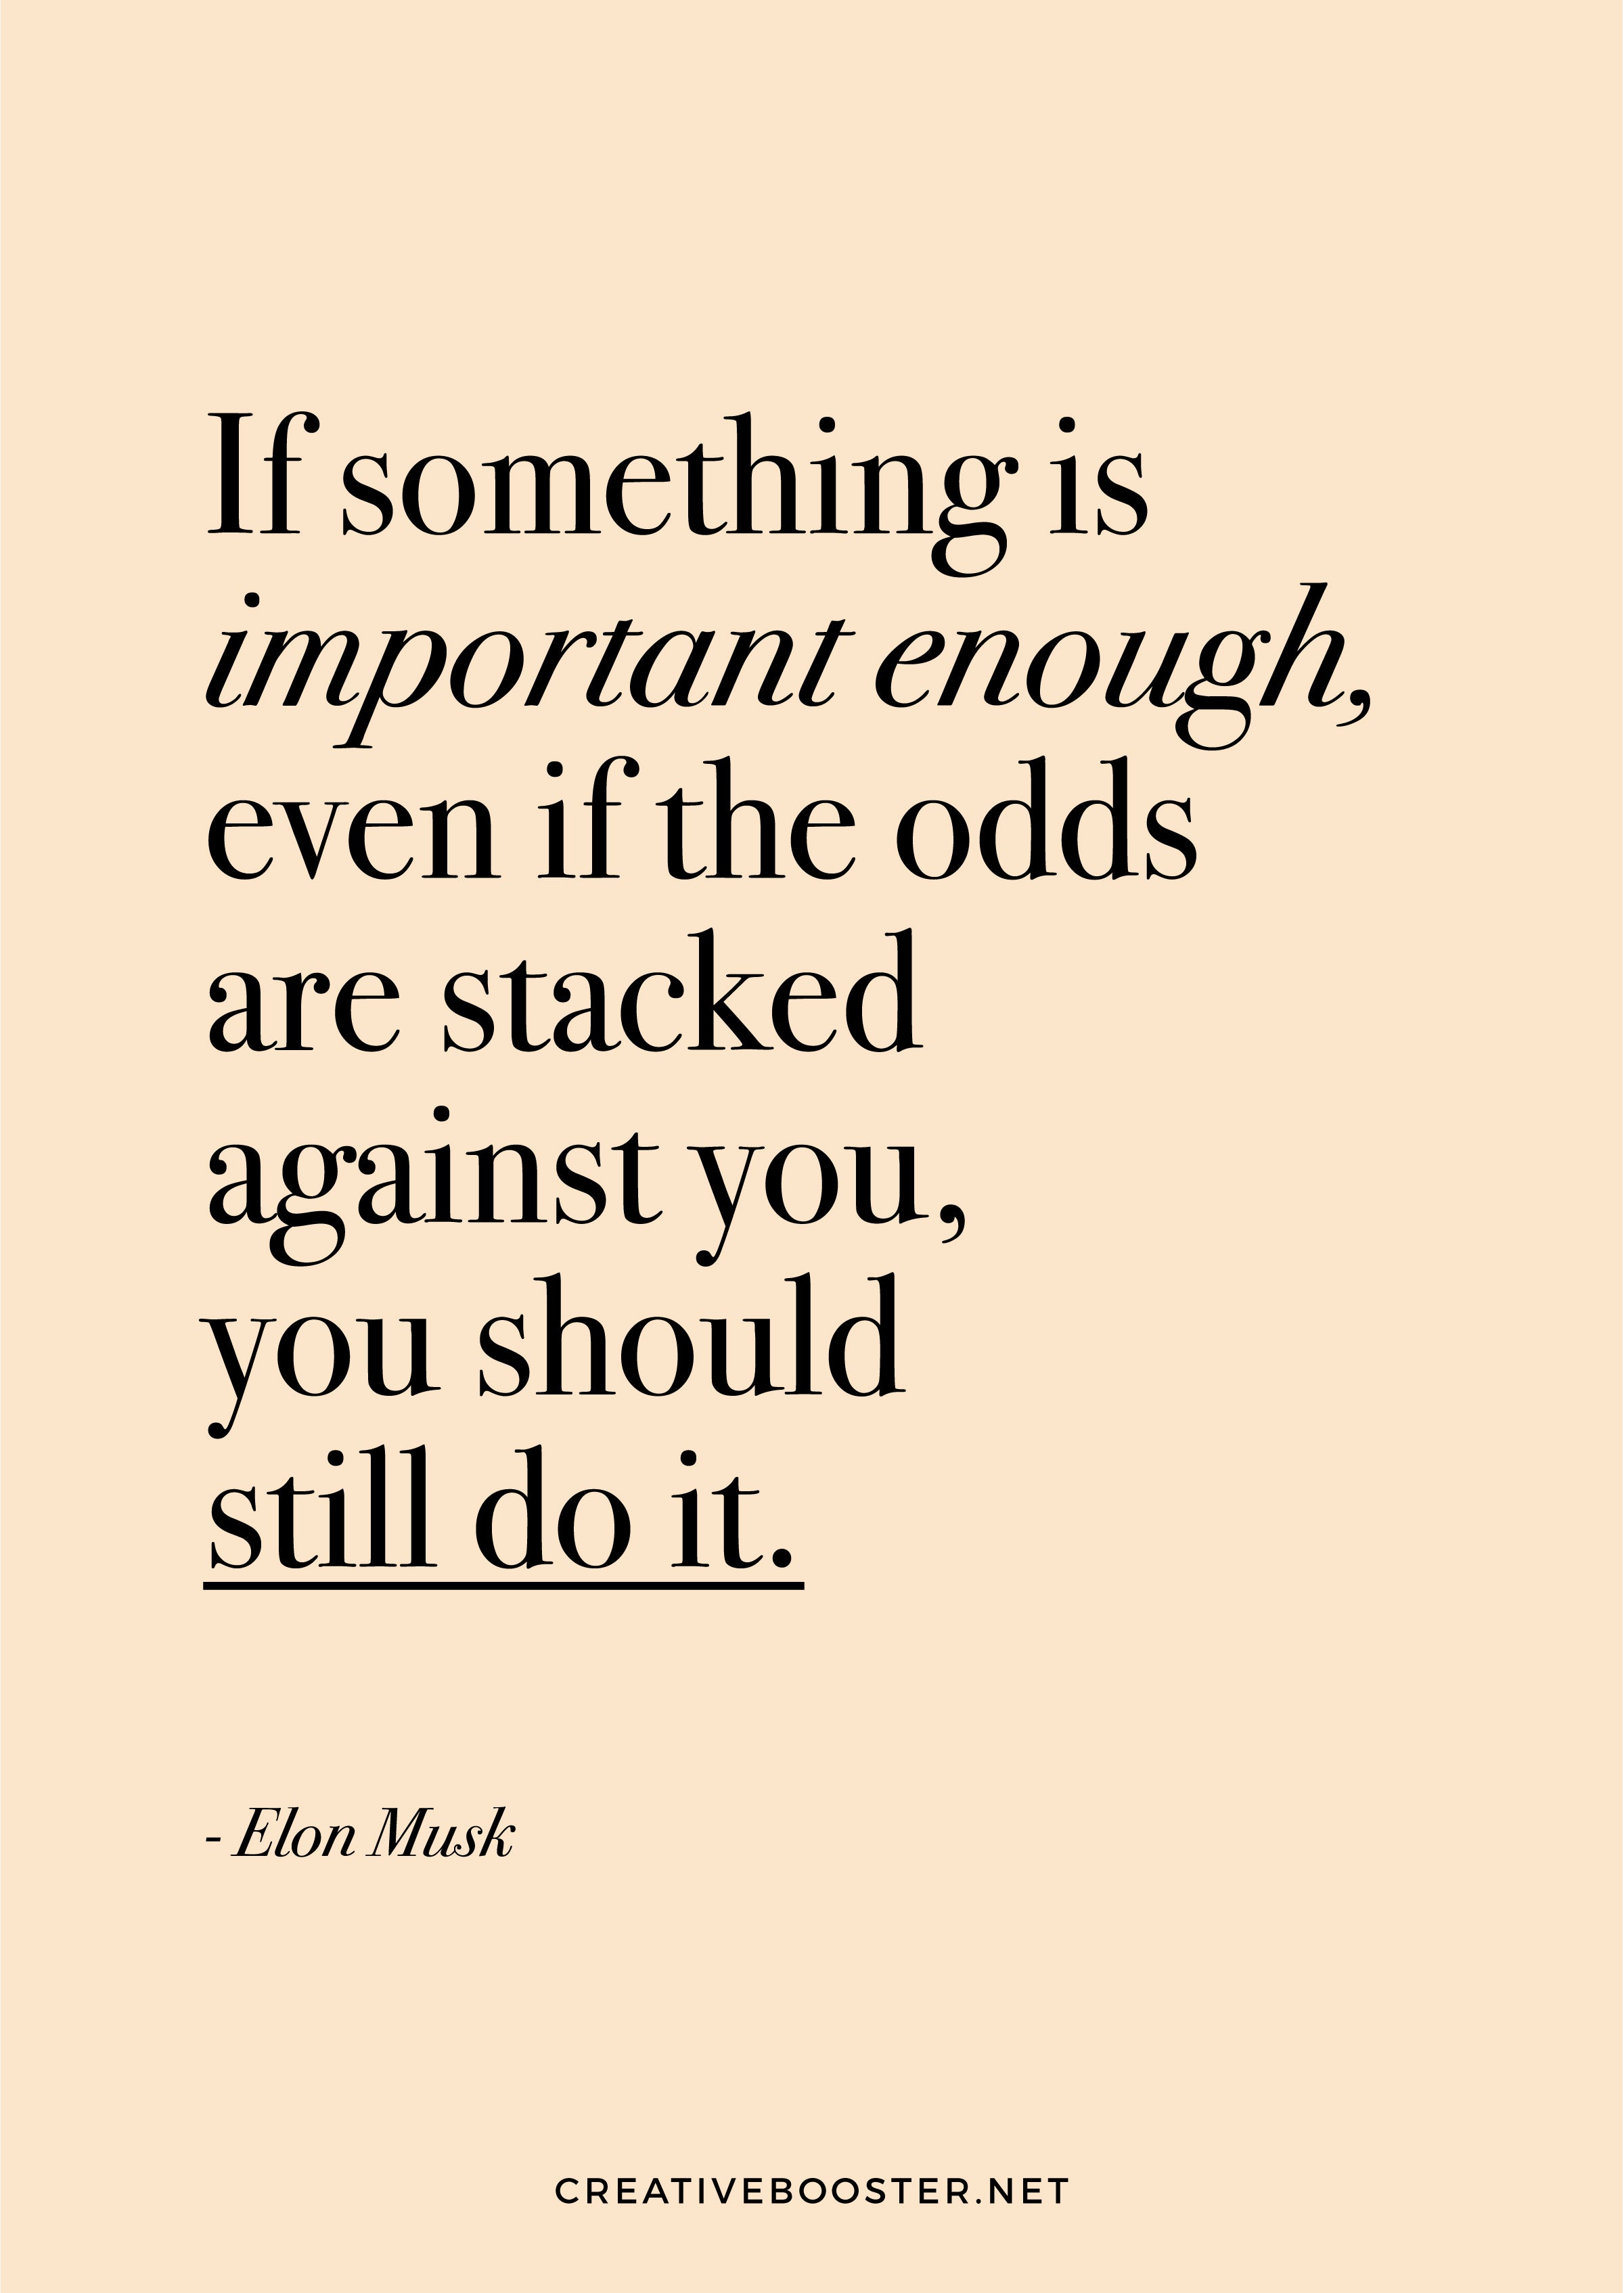 You-Got-This-Quotes-For-Work-“If something is important enough, even if the odds are stacked against you, you should still do it.” – Elon Musk (Quote Art Print)